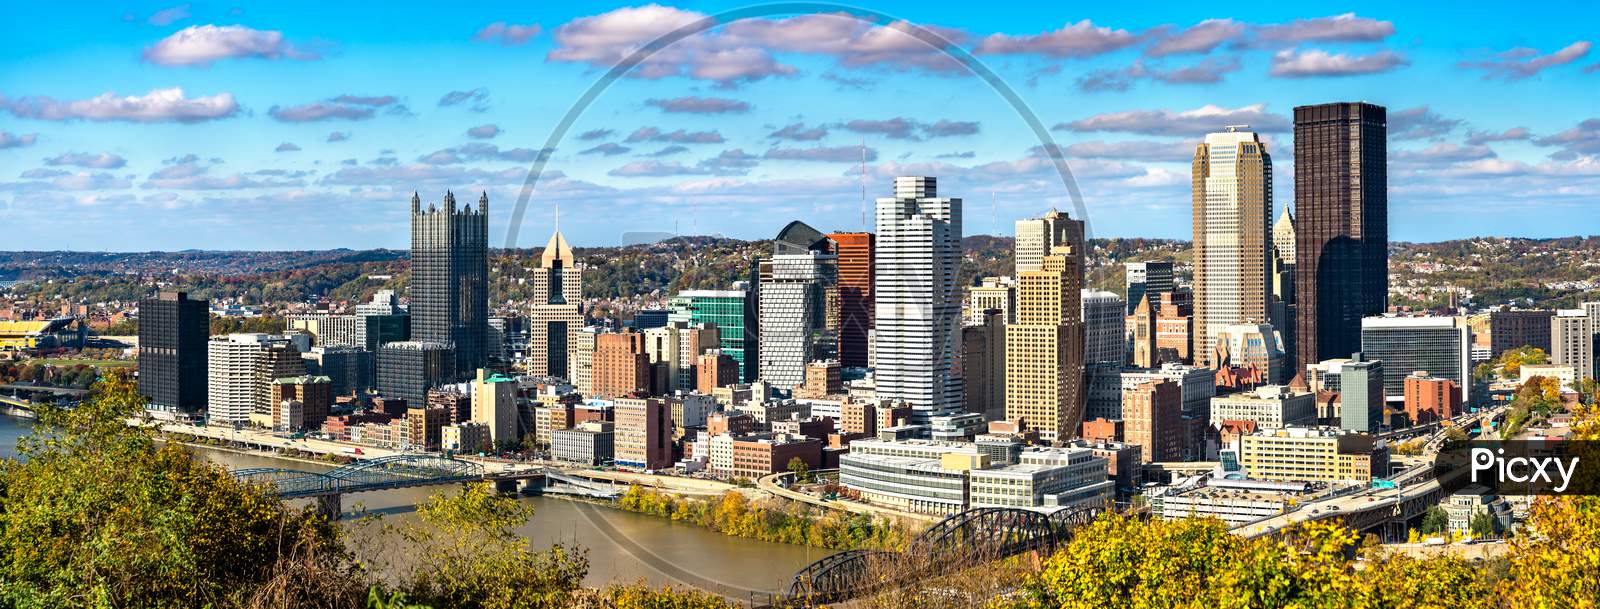 Panorama Of Downtown Pittsburgh, Known As The Golden Triangle. Pennsylvania, Usa